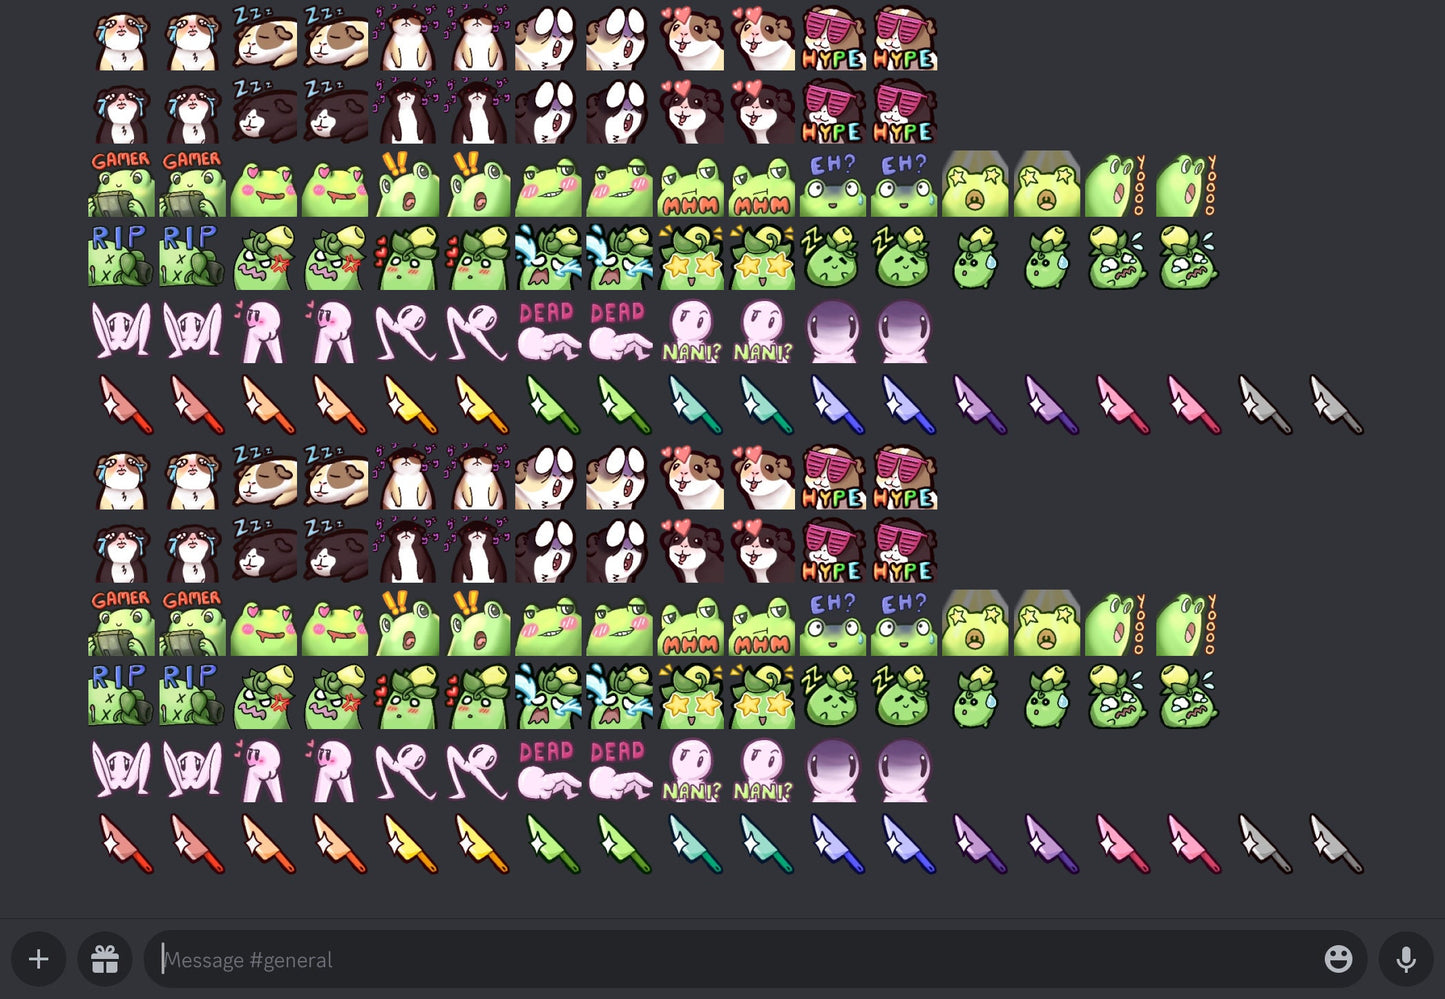 Tricolor Guinea Pig Emote 6 Pack - 6 Reaction Emotes for Twitch, Discord, YouTube, Streaming Chat Etc